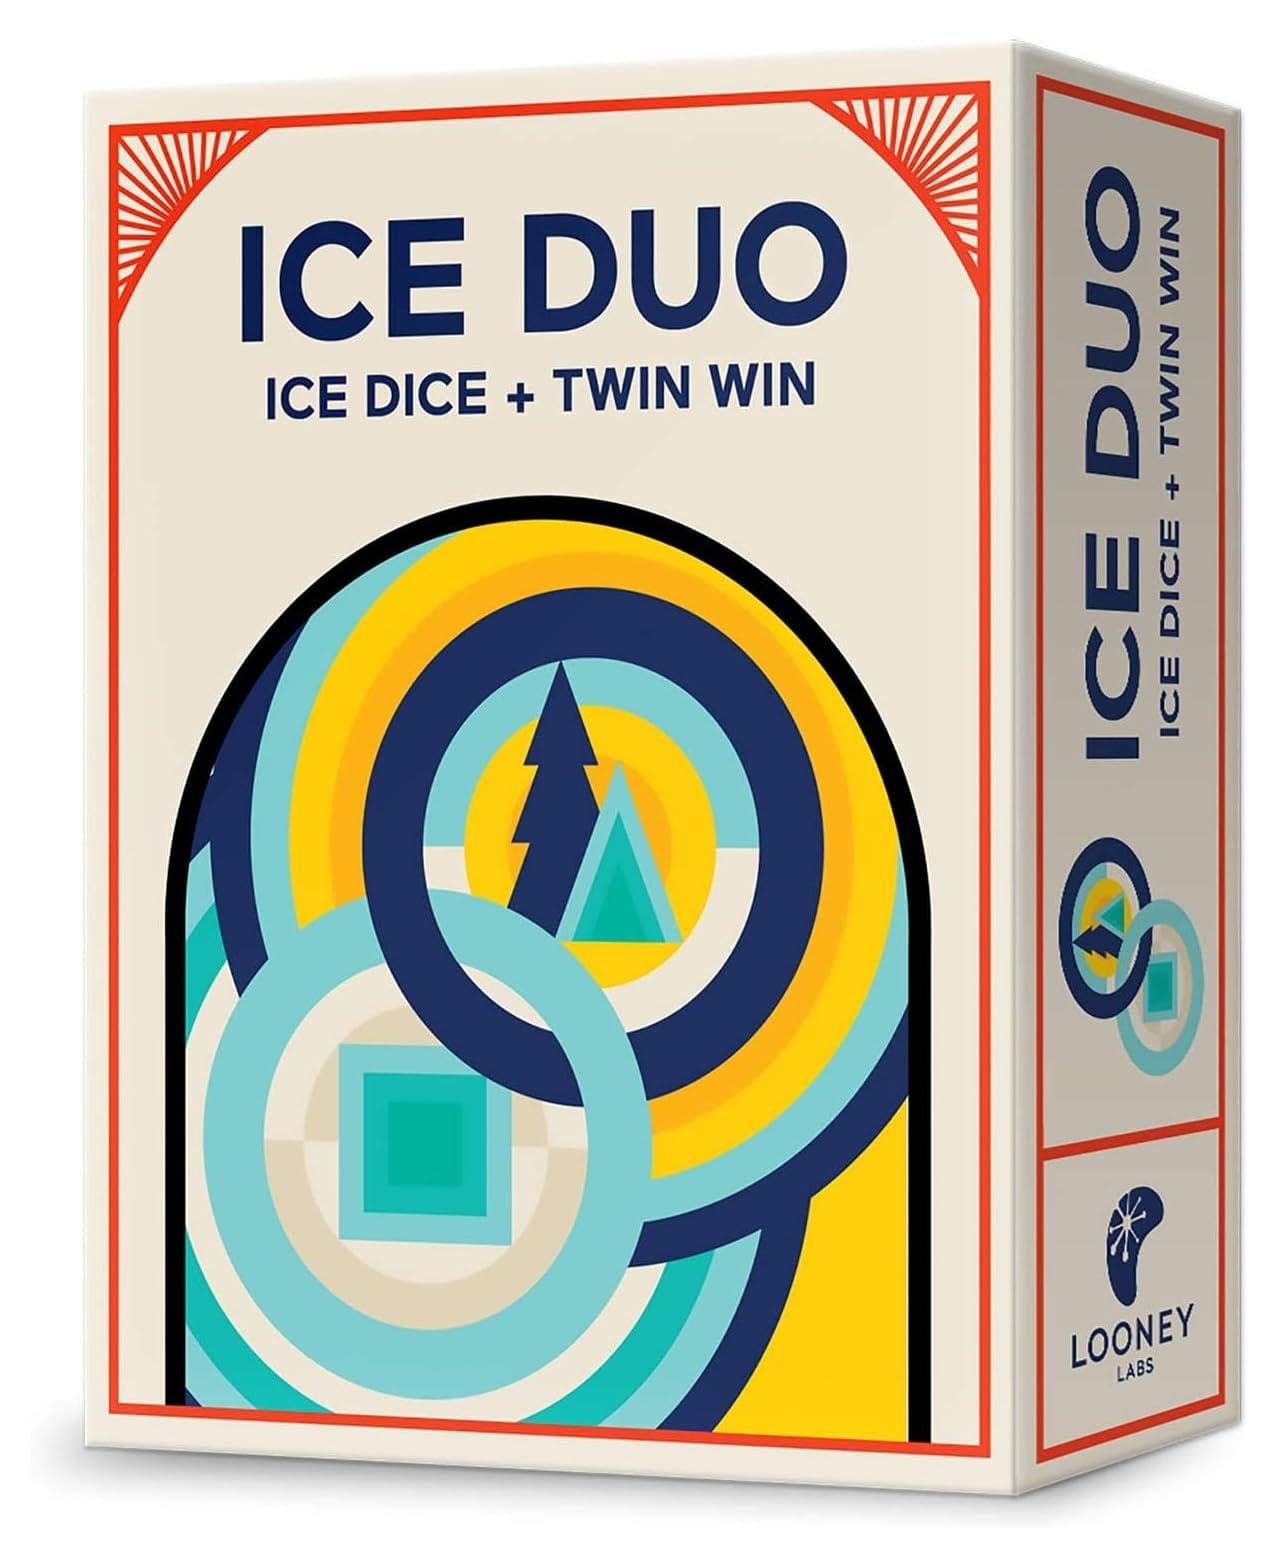 Looney Labs Ice Duo - Lost City Toys